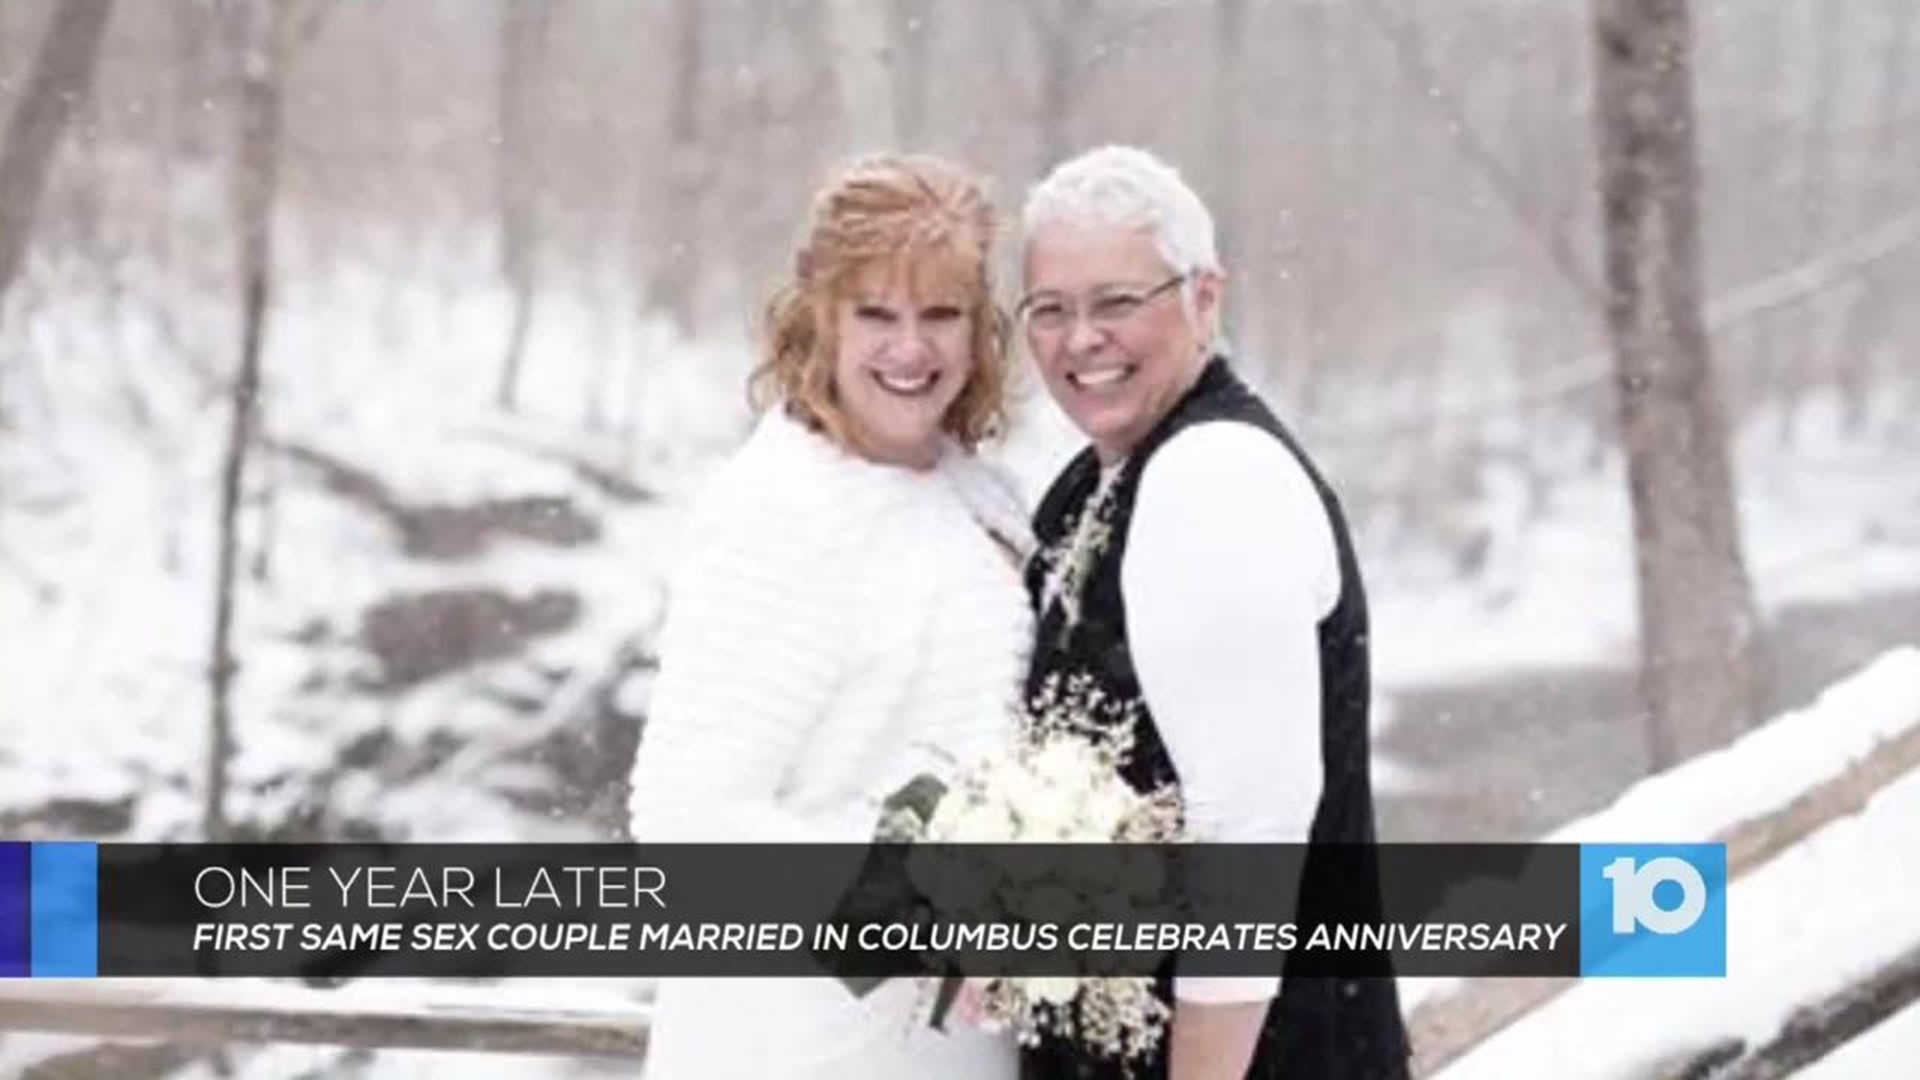 First same-sex couple married in Columbus celebrates anniversary 10tv photo